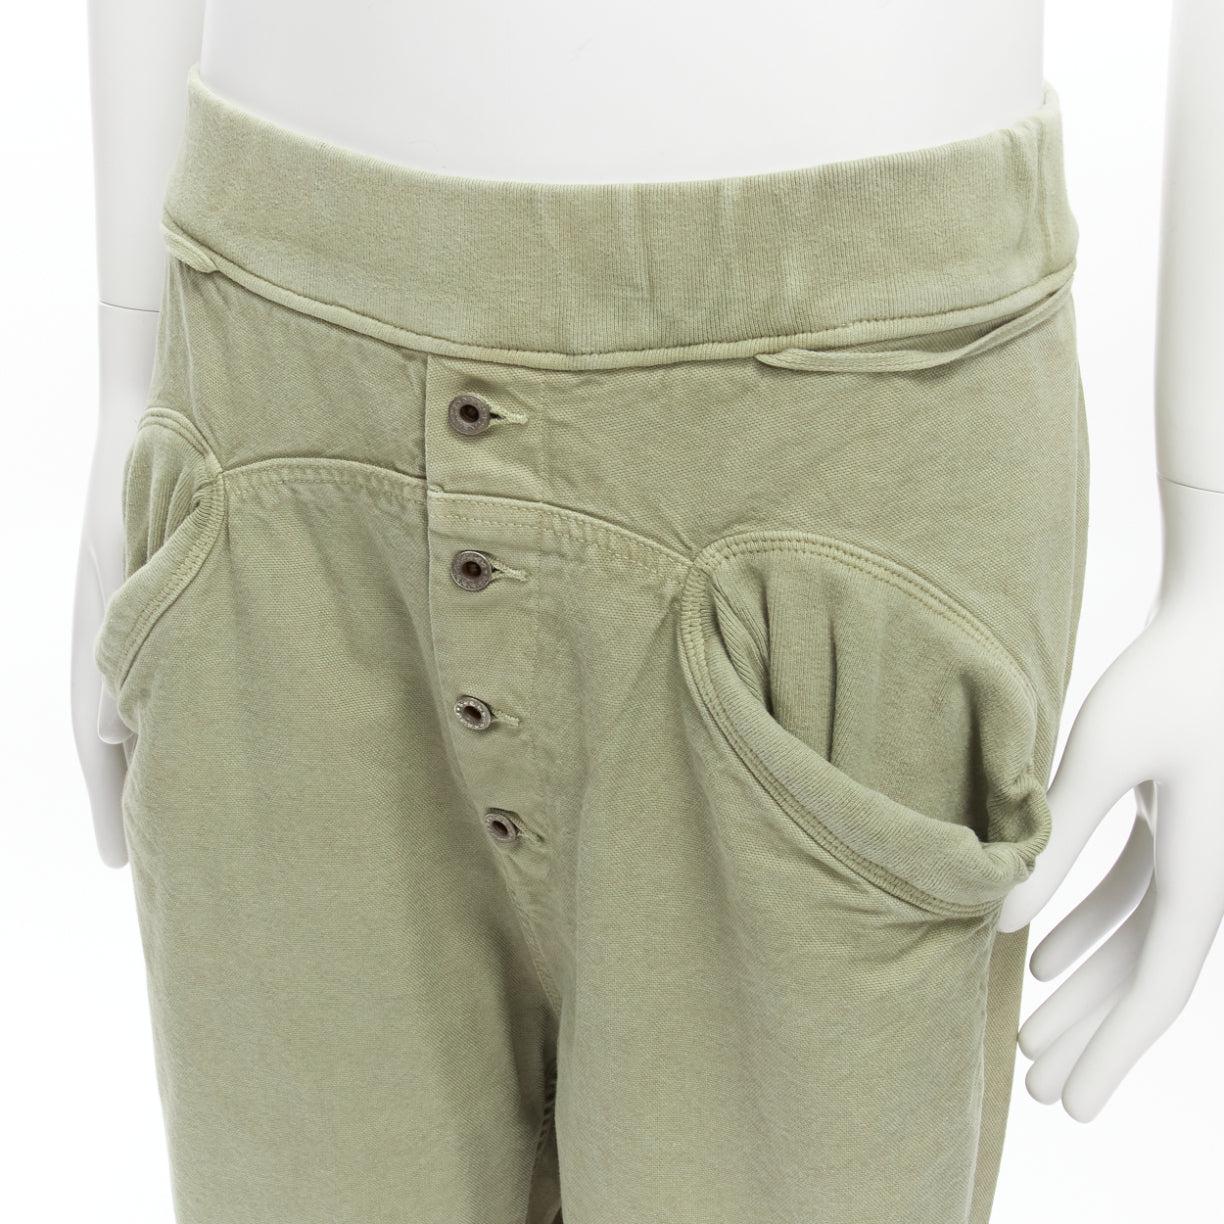 KAPITAL 100% washed cotton green distressed buttons elasticated waist pant JP3 L
Reference: YNWG/A00173
Brand: Kapital
Material: Cotton
Color: Green
Pattern: Solid
Closure: Button Fly
Extra Details: Button fly and elasticated waistband closure. 2